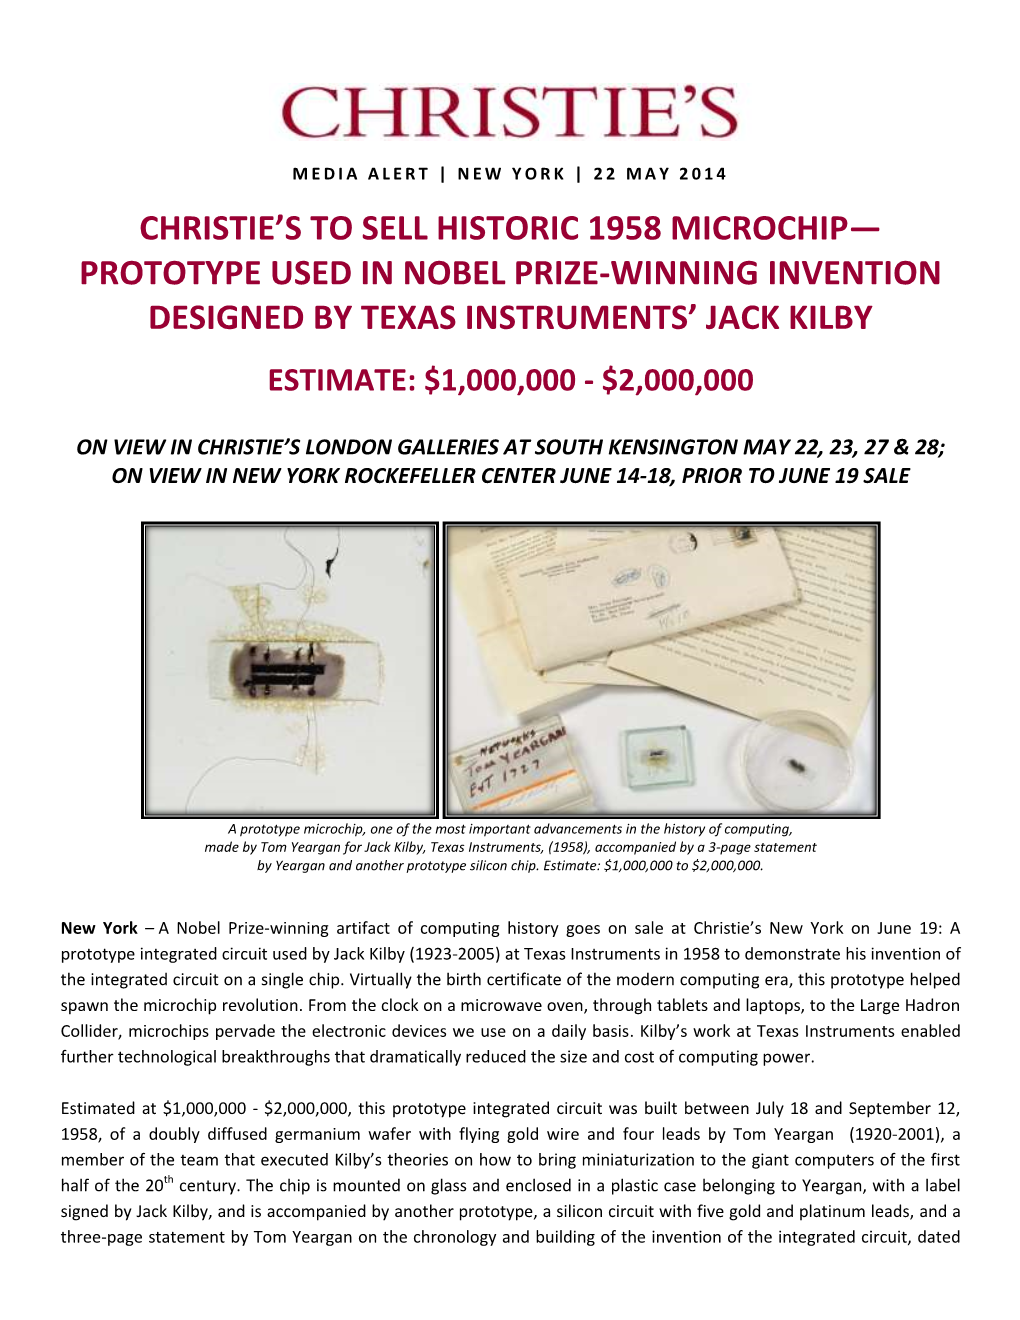 Christie's to Sell Historic 1958 Microchip— Prototype